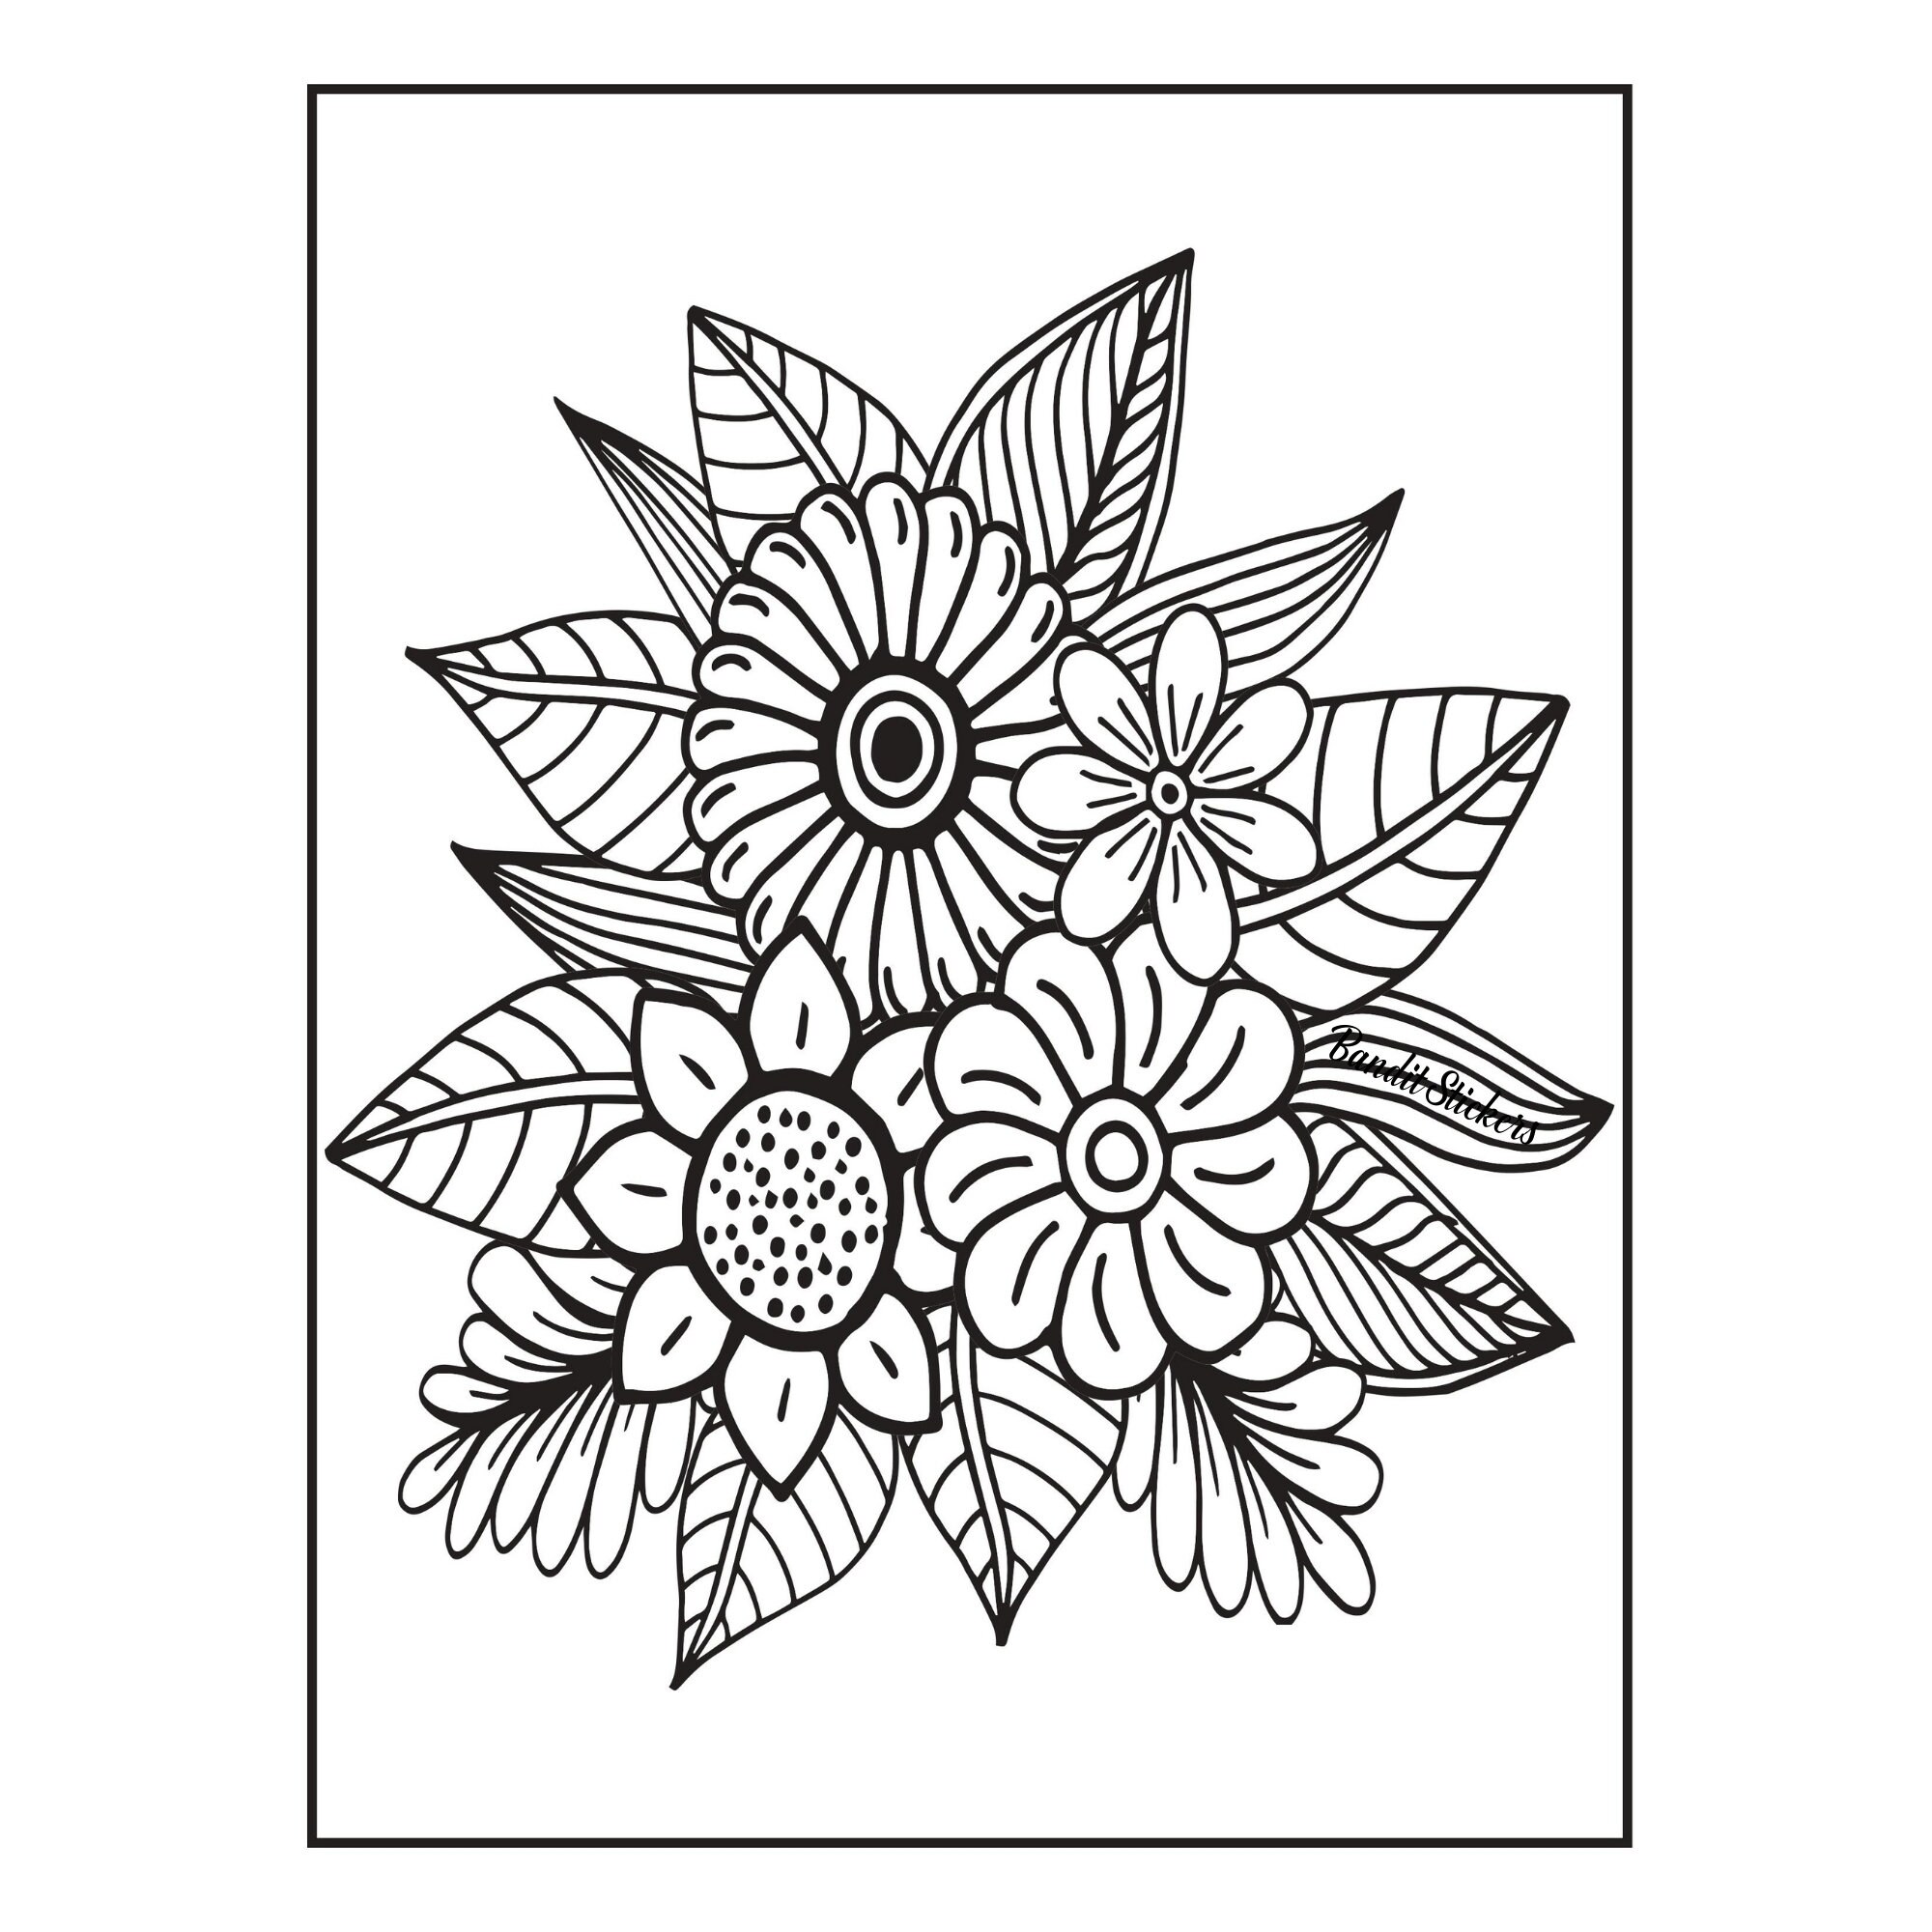 Flowers Easy Coloring Book for Adults: A Small Pocket Size Coloring Book 5x6 Inches , Art Therapy for Relaxation : Colorful Line Drawing Flower Cover